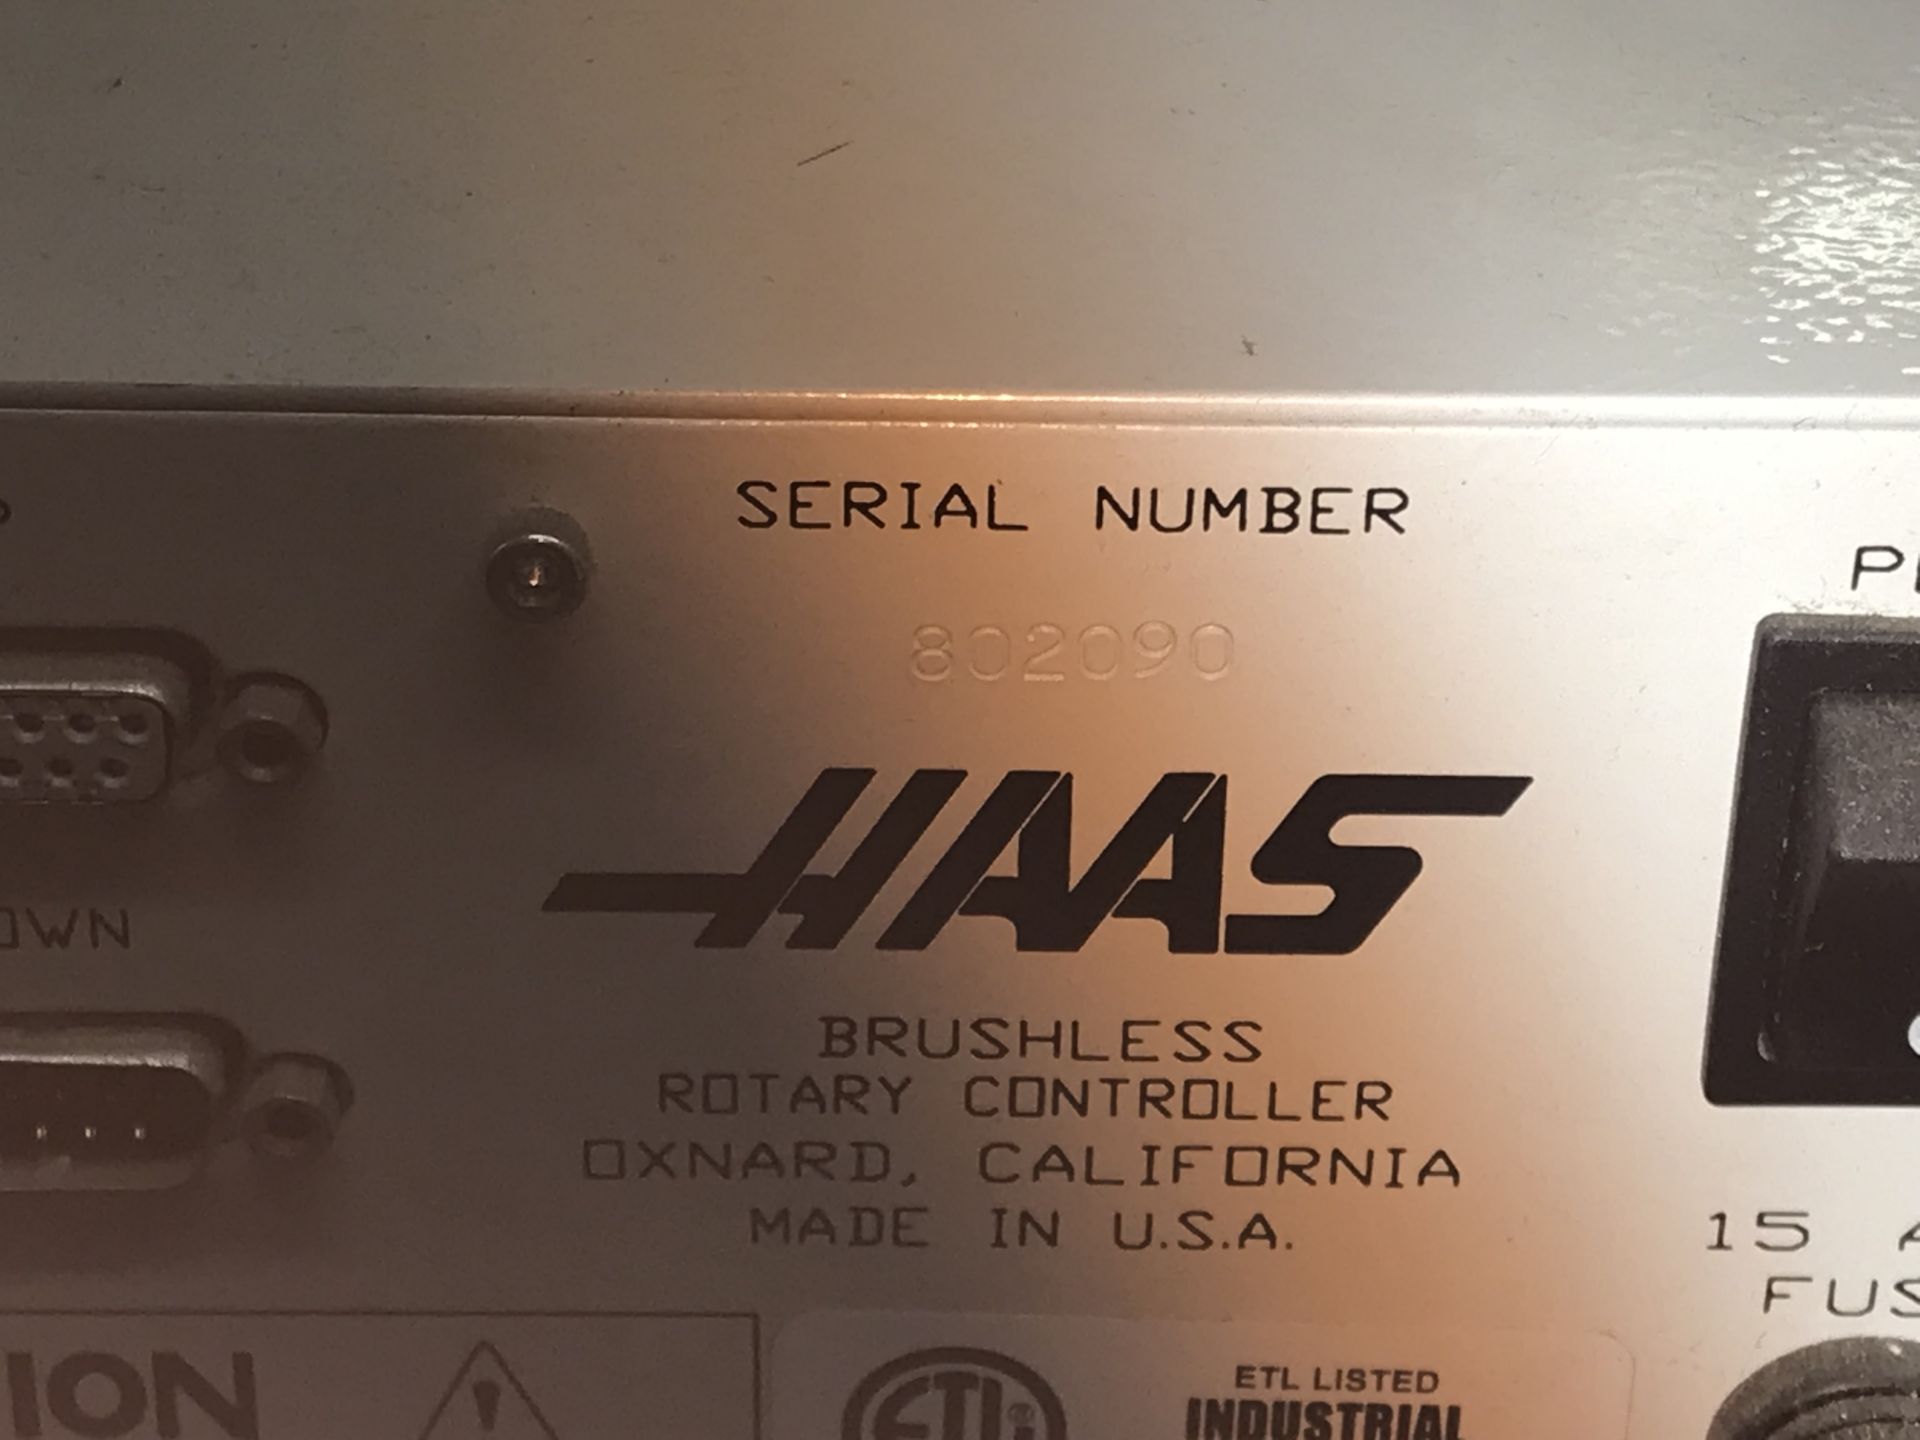 HAAS BRUSHLESS ROTARY CONTROL, NEVER USED, SN: 8020980 - Image 4 of 4